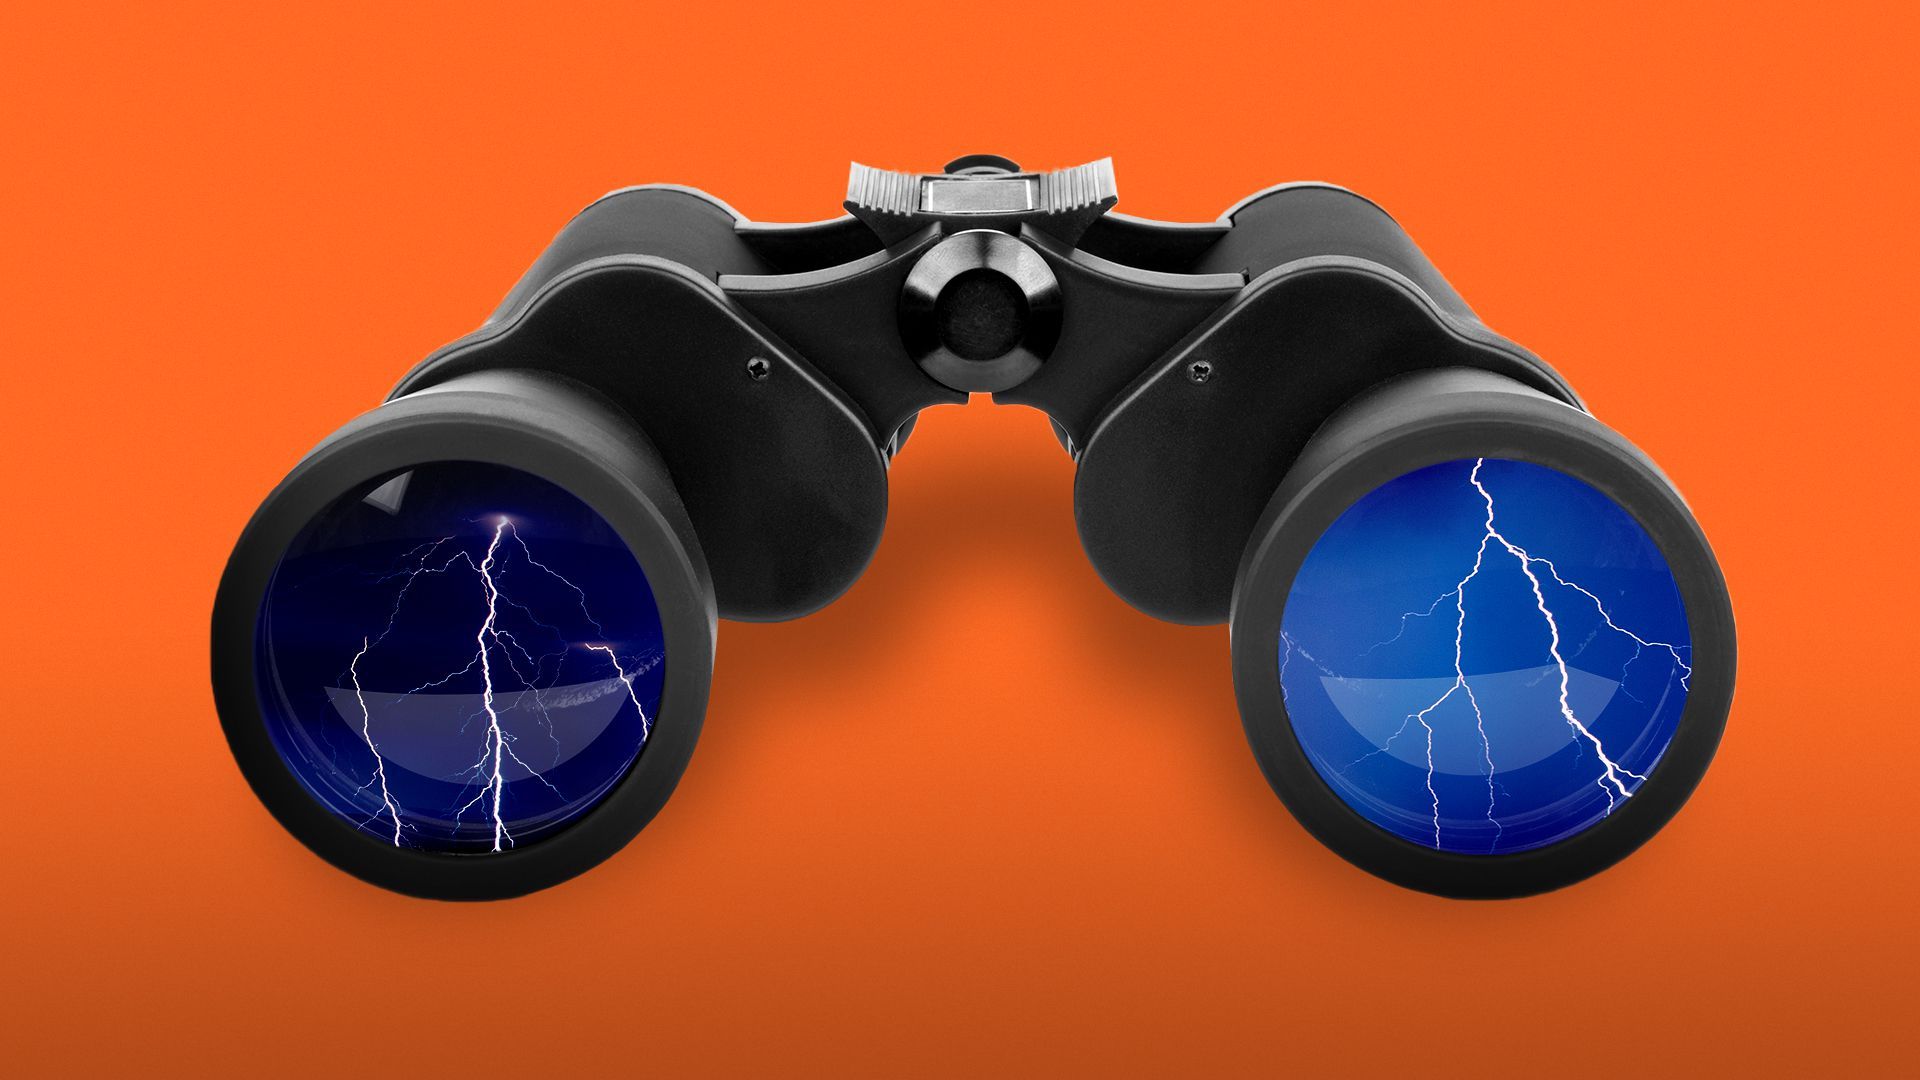 Illustration of binoculars with a lightning storm reflected in the lenses